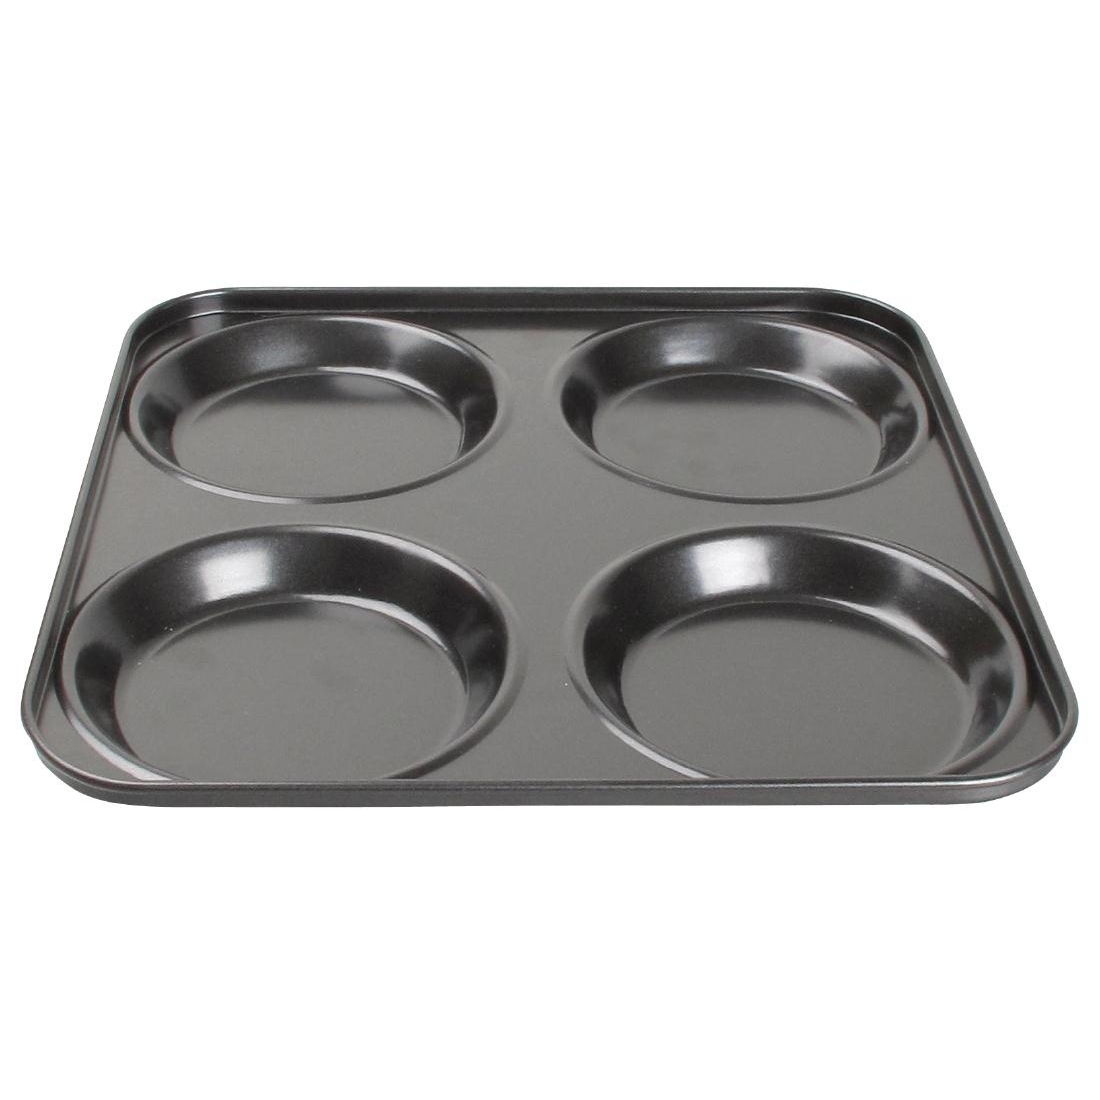 Vogue Non-Stick Yorkshire Pudding Tray